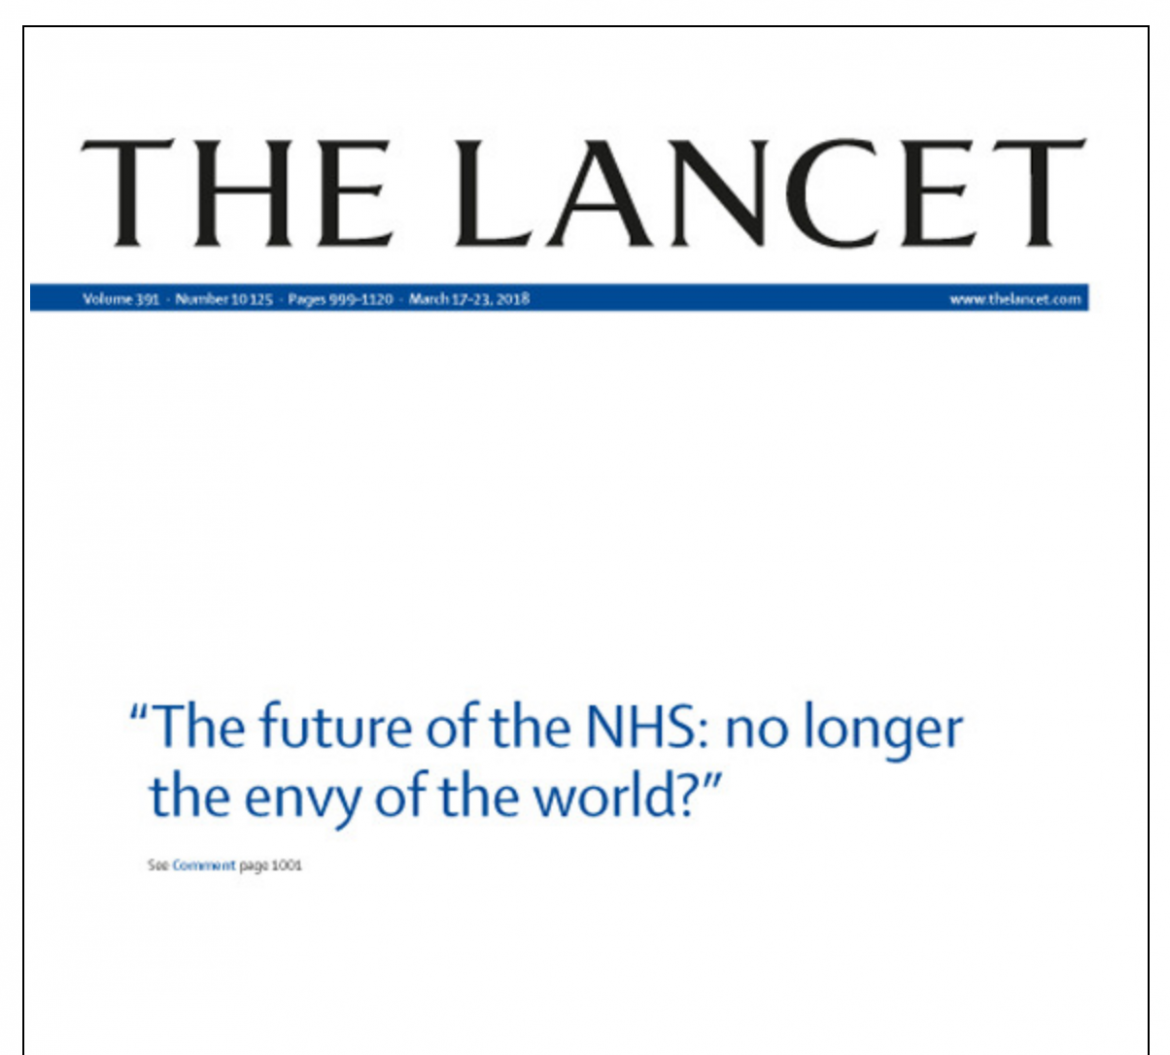 Lancet hails GH5050 report as landmark in global health history – and commits to do better